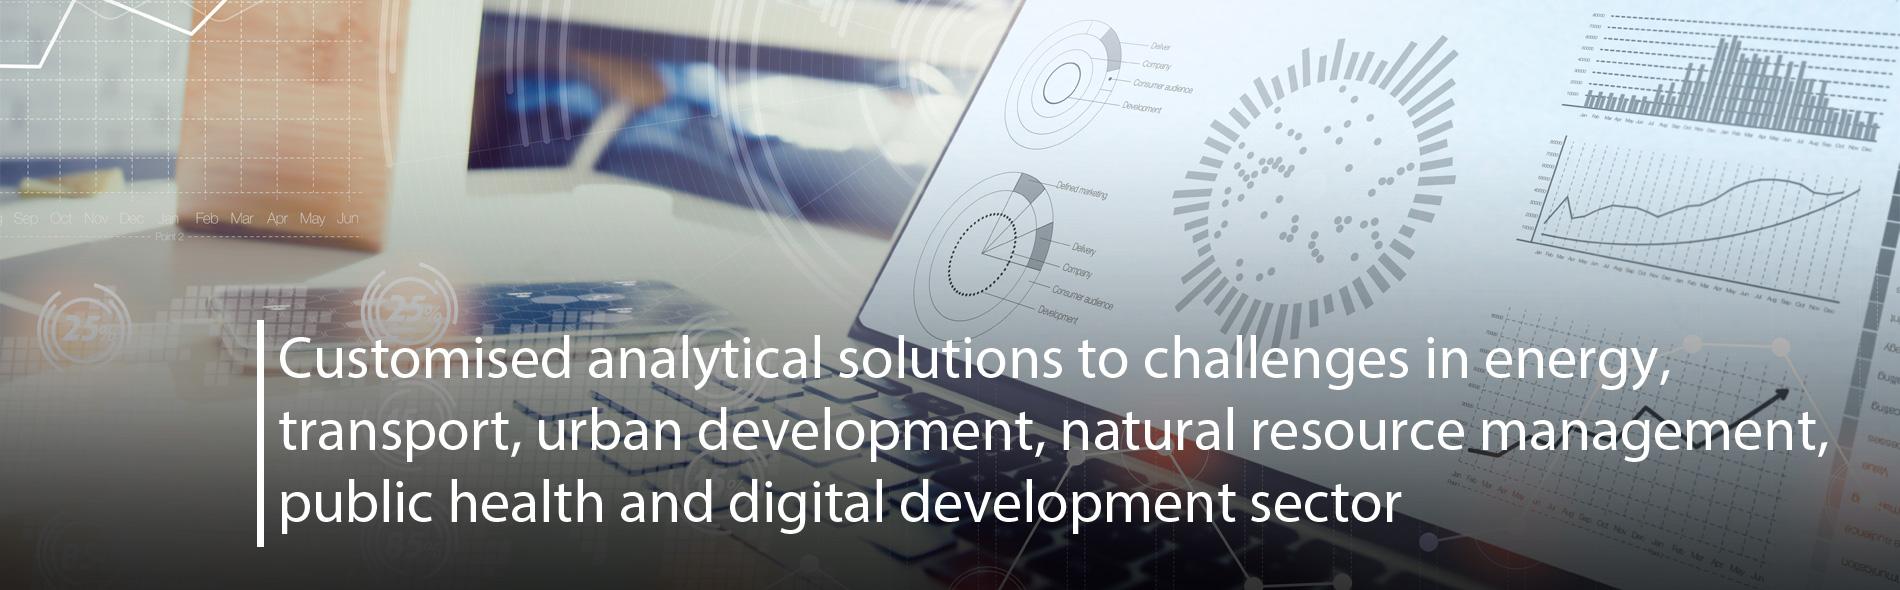 Customized Analytical Solutions